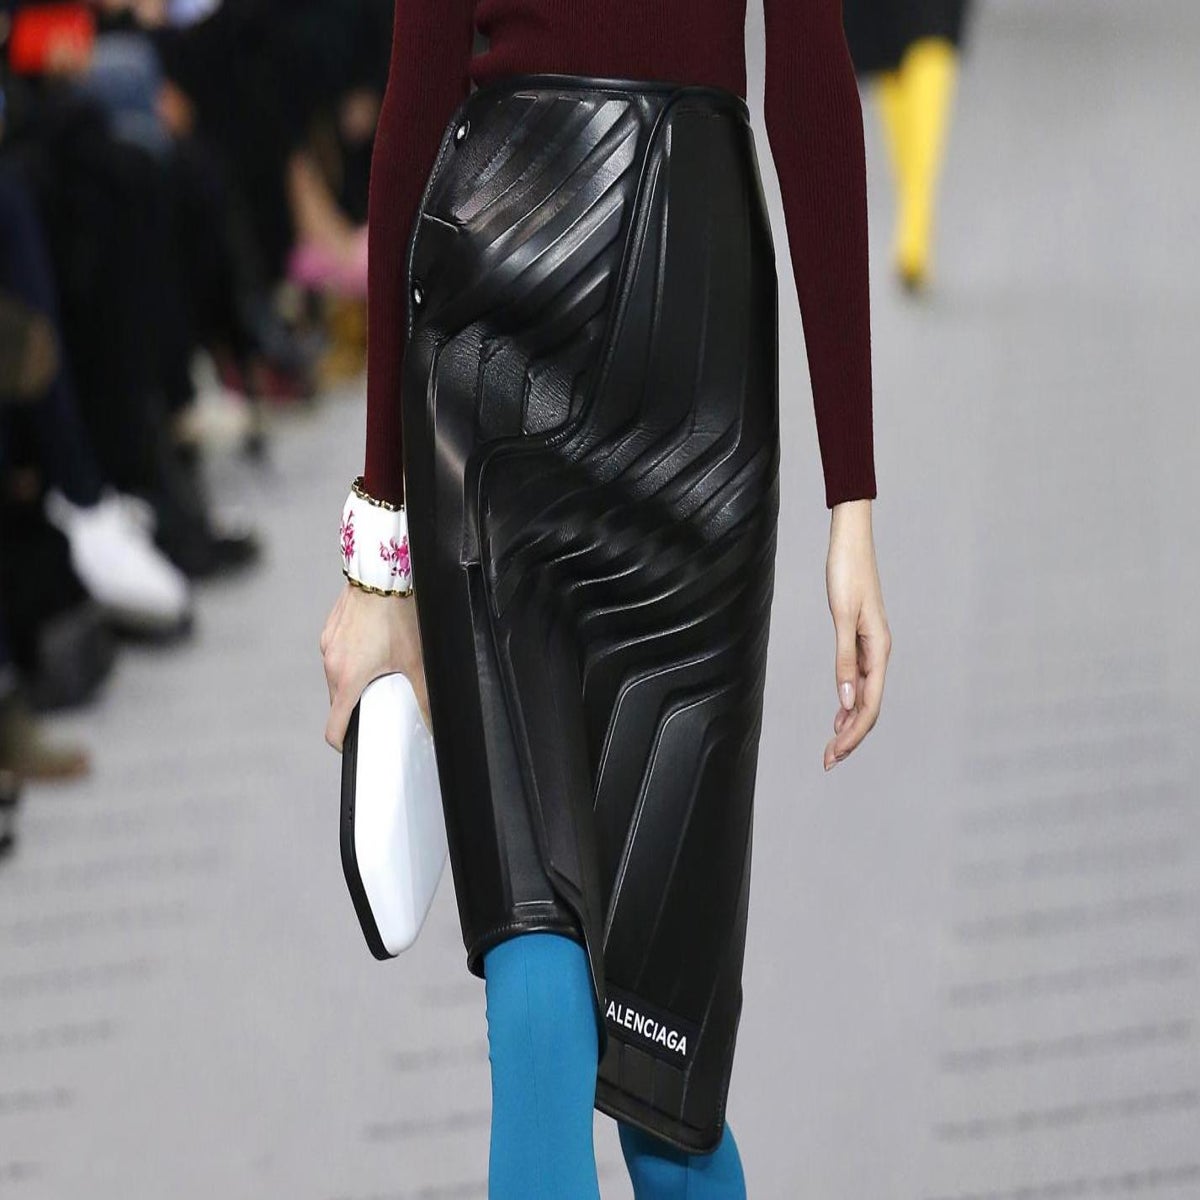 Balenciaga selling rubber skirt that looks like a carpet protector | Independent The Independent